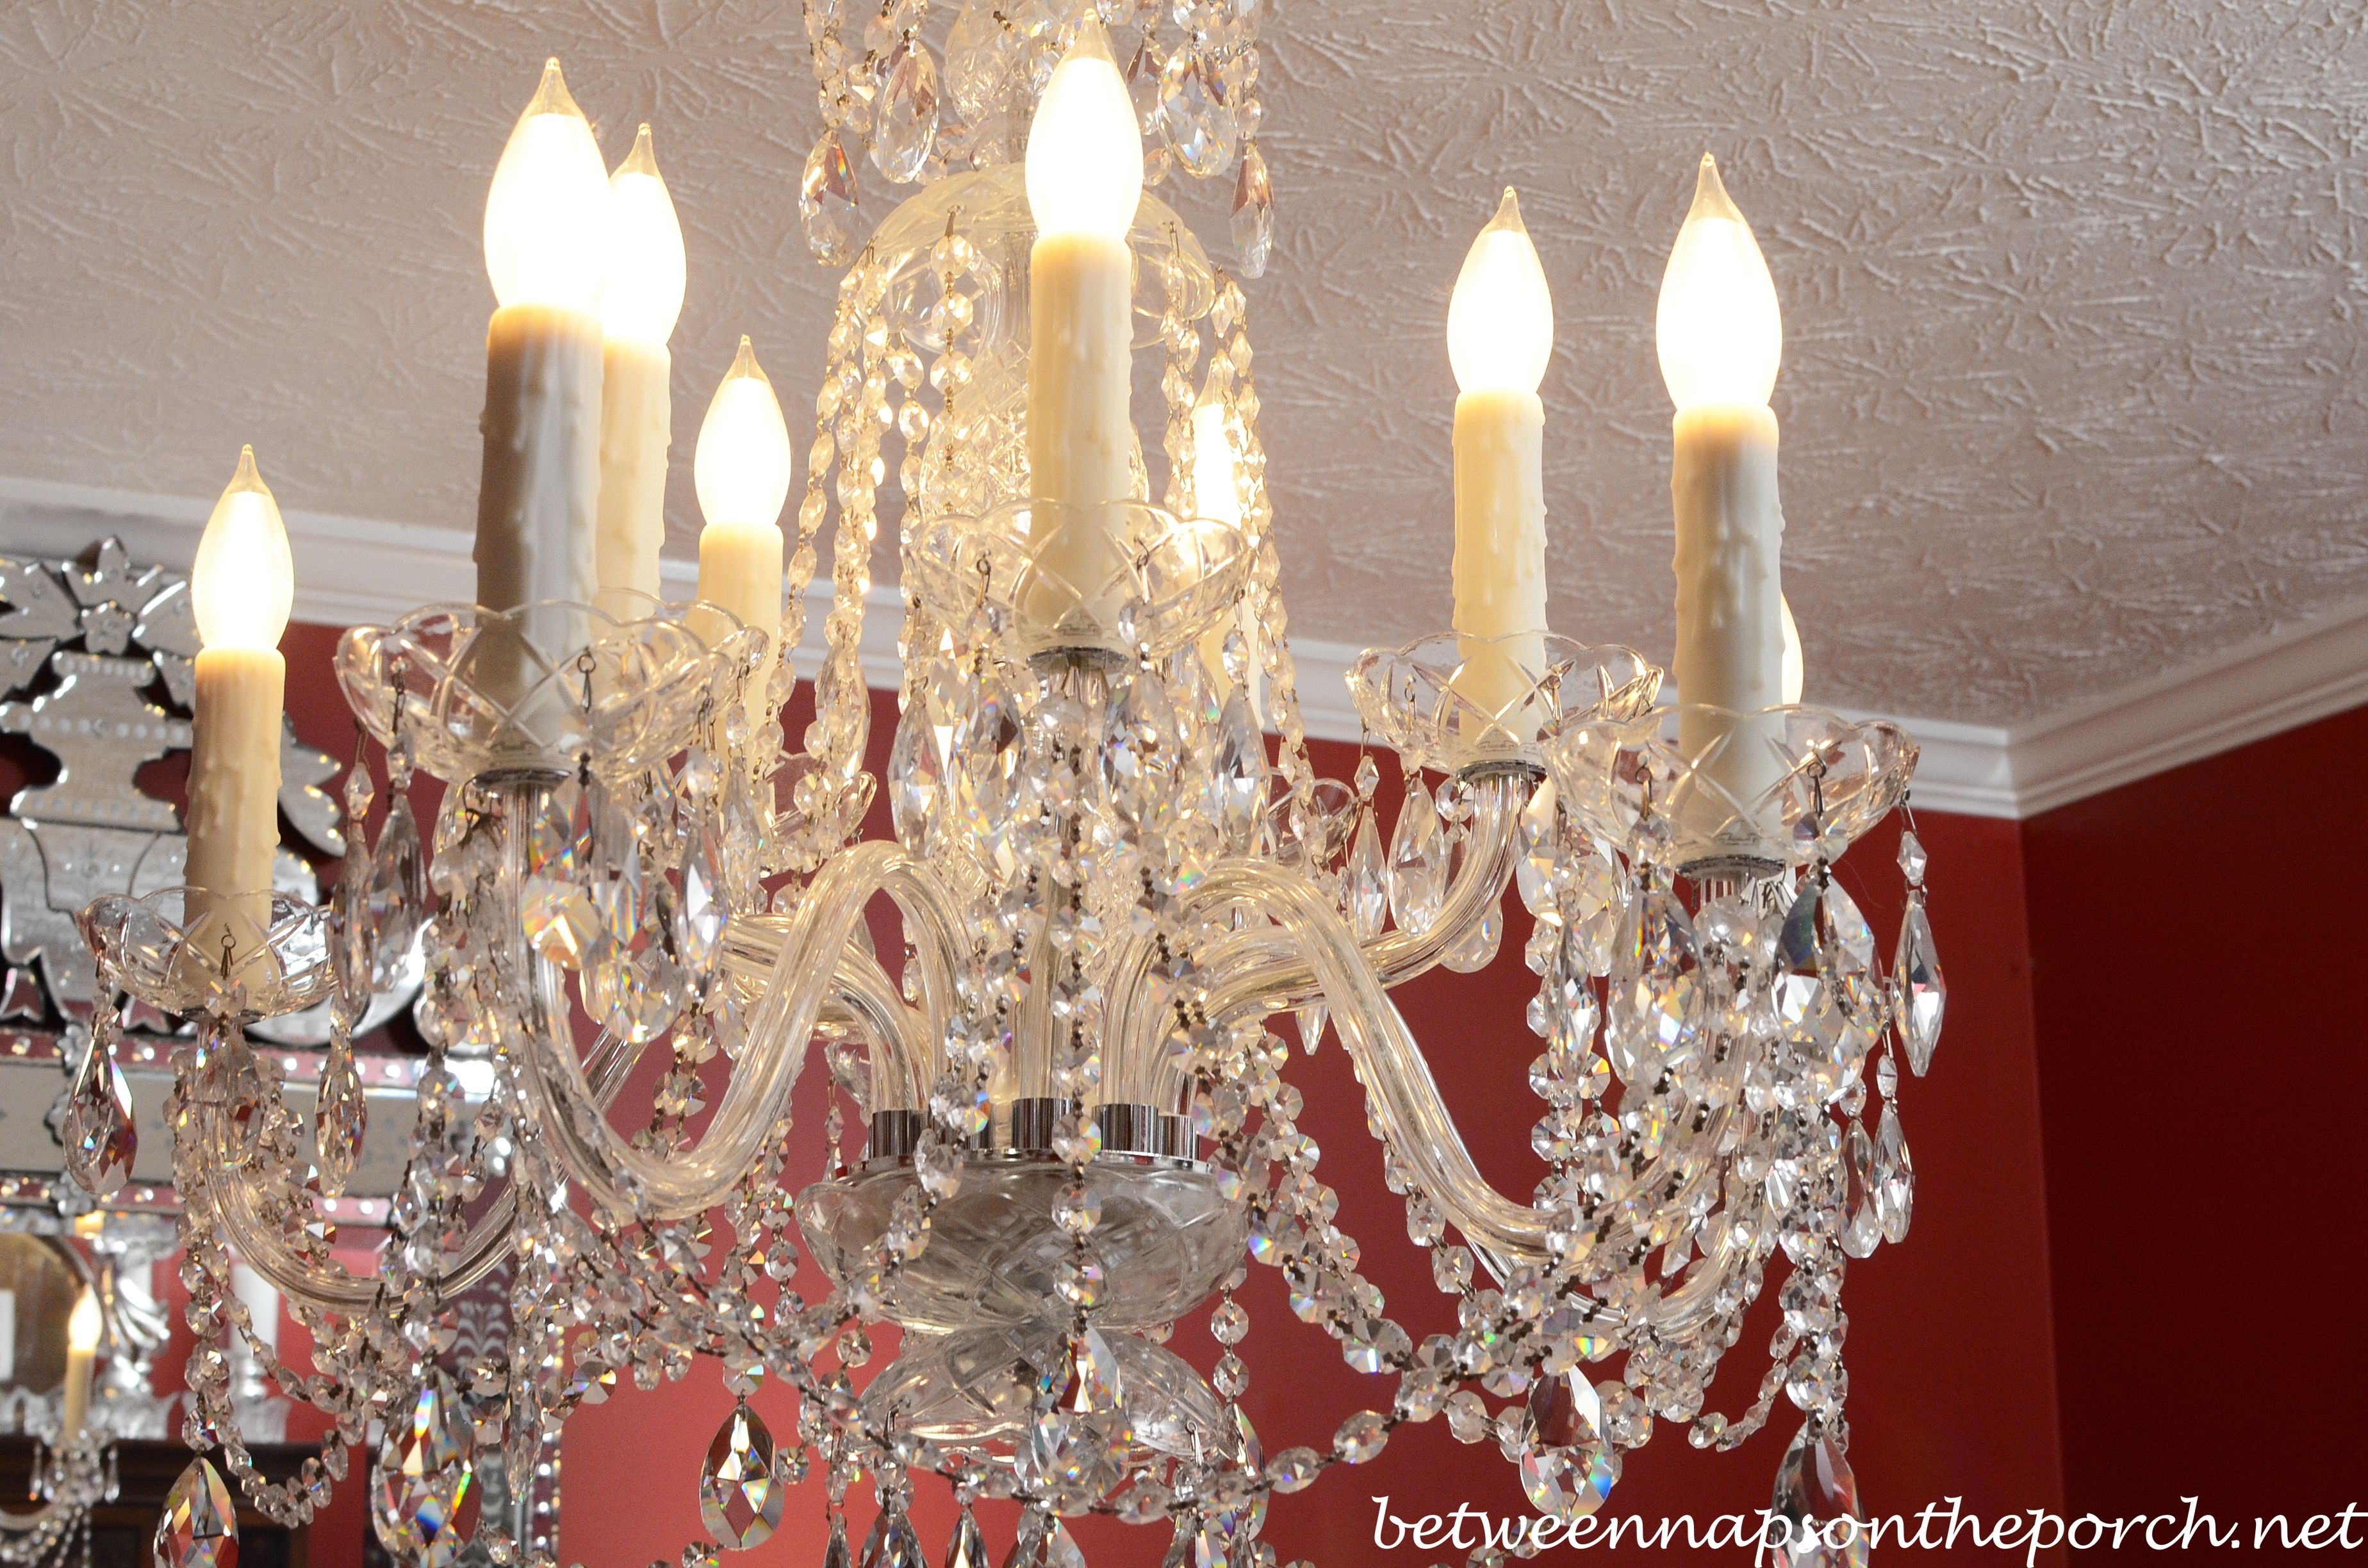 Transform An Ordinary Chandelier With Resin Candle Covers And Silk With Regard To Candle Look Chandeliers (View 11 of 25)